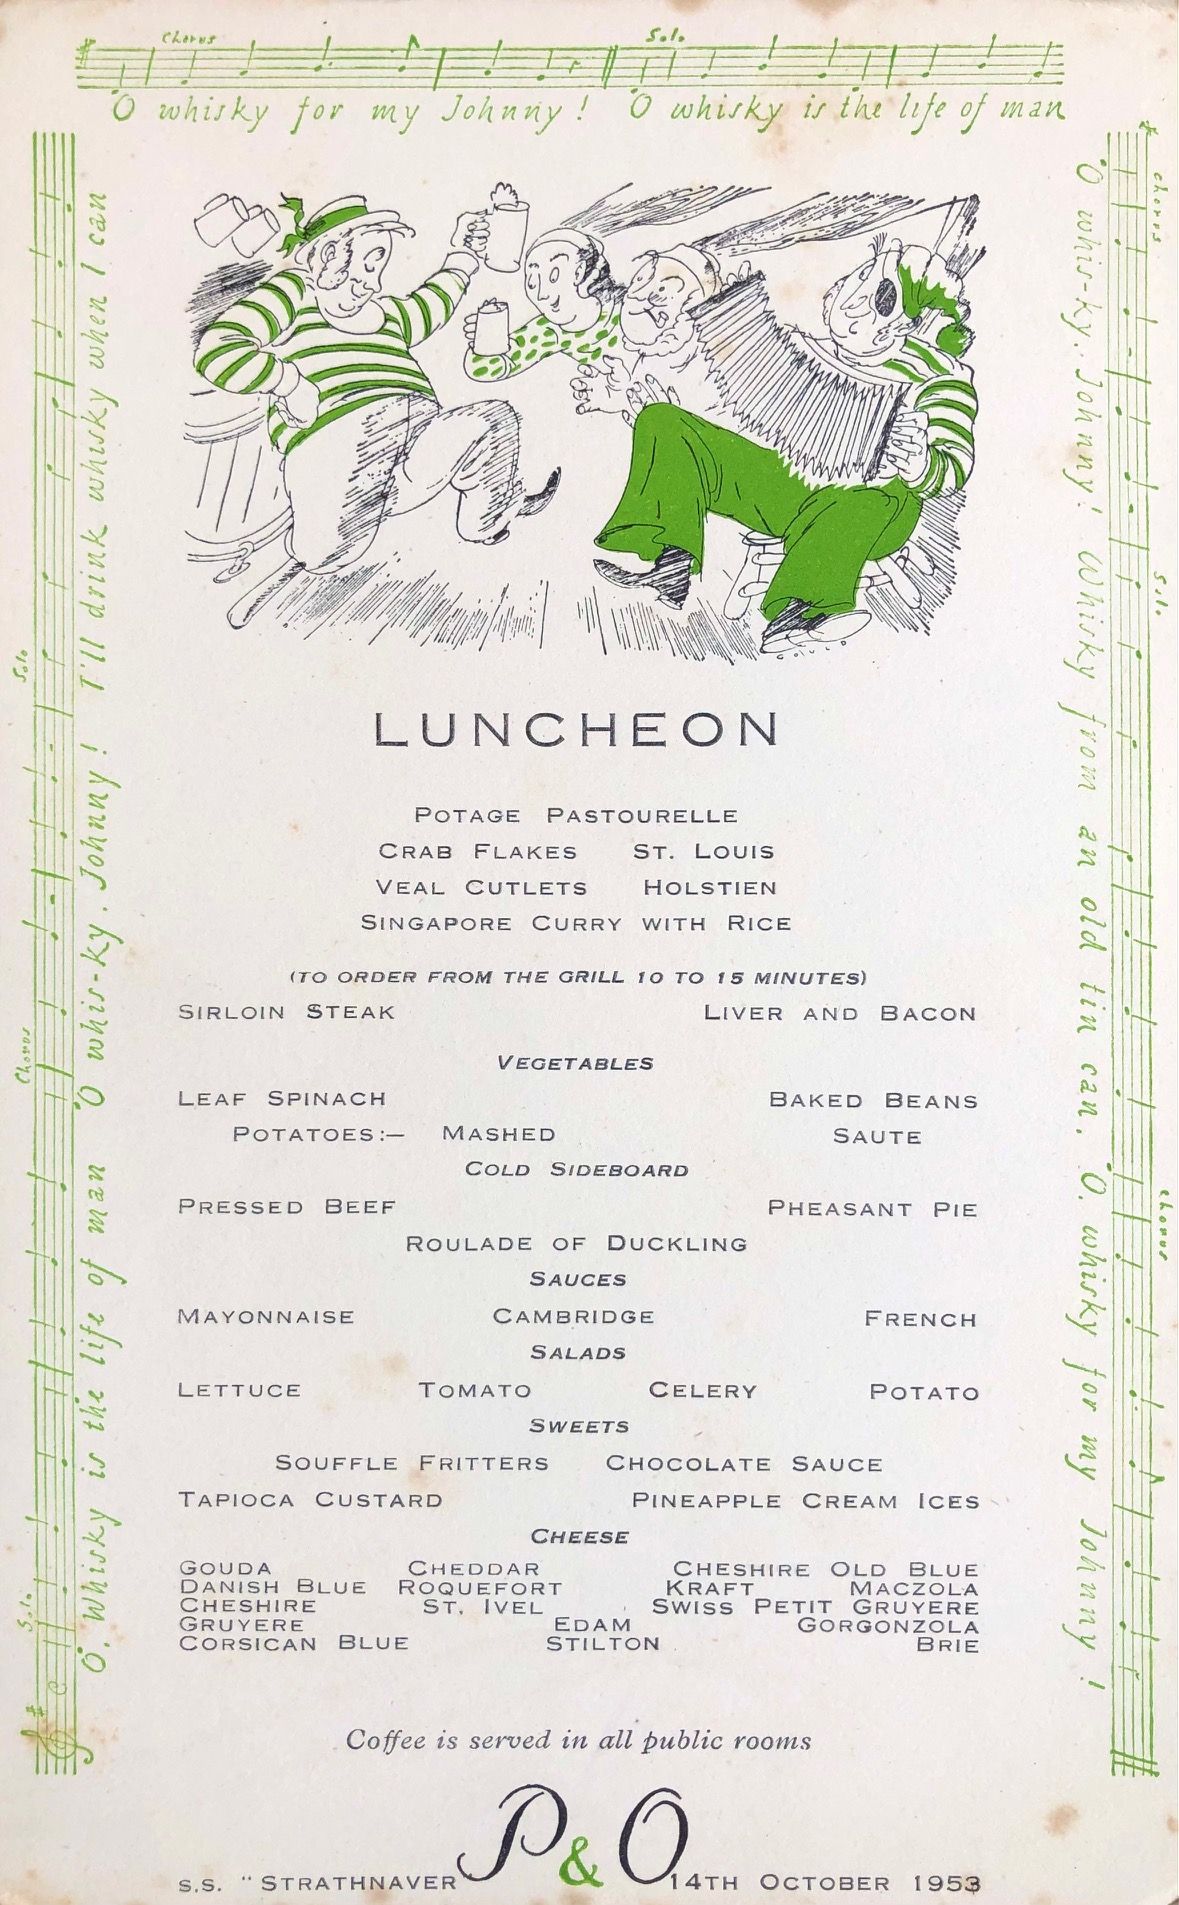 *NEW* P & O Lines. S.S. "Strathnaver" Luncheon Menu - Whisky